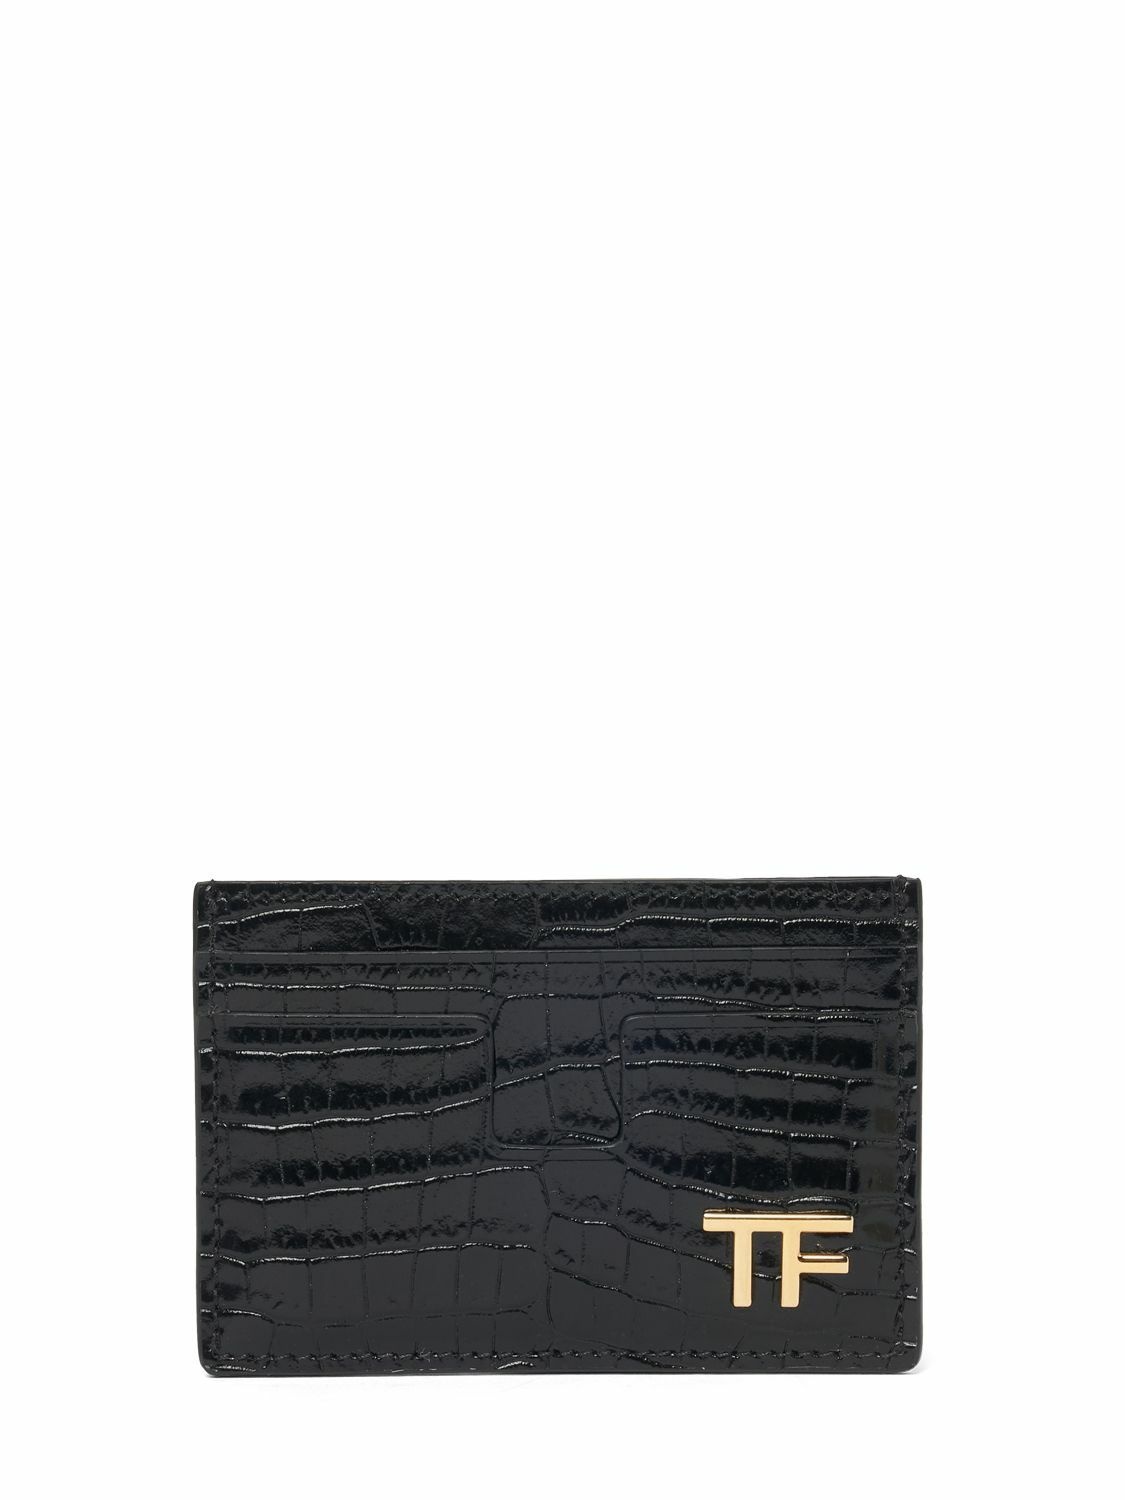 Photo: TOM FORD - Alligator Printed Leather Card Case